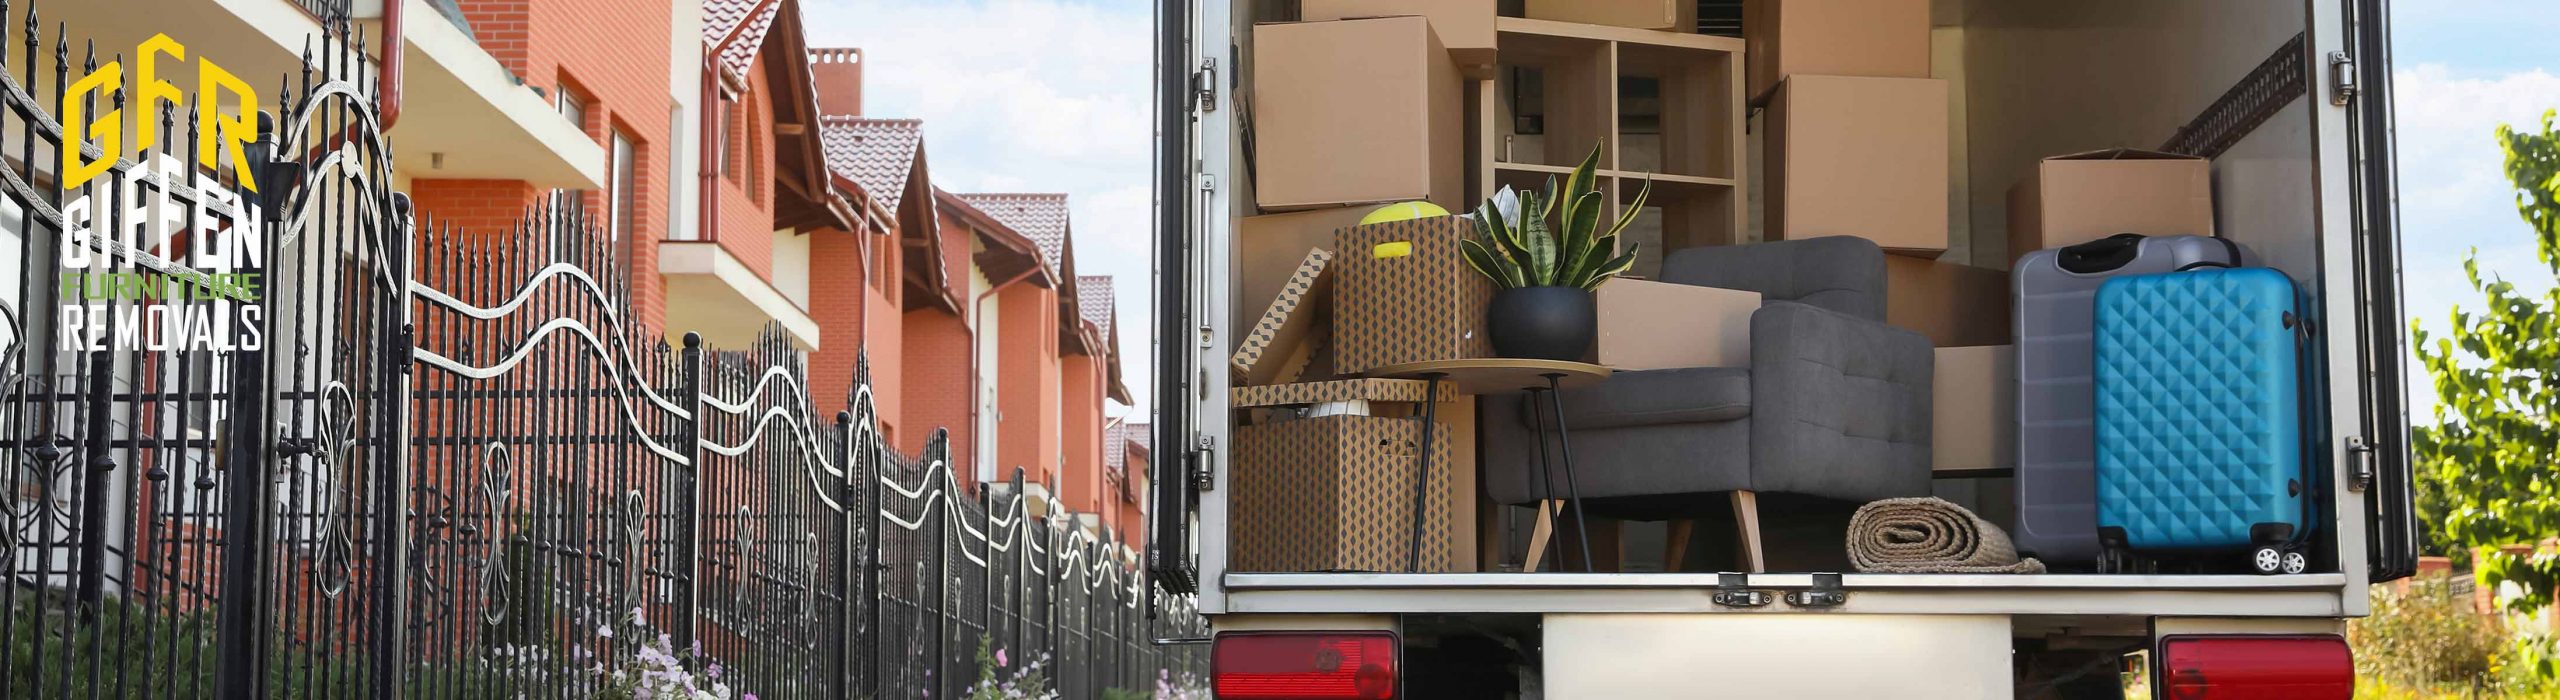 Giffen Furniture Removals How To Prepare For An Interstate Move